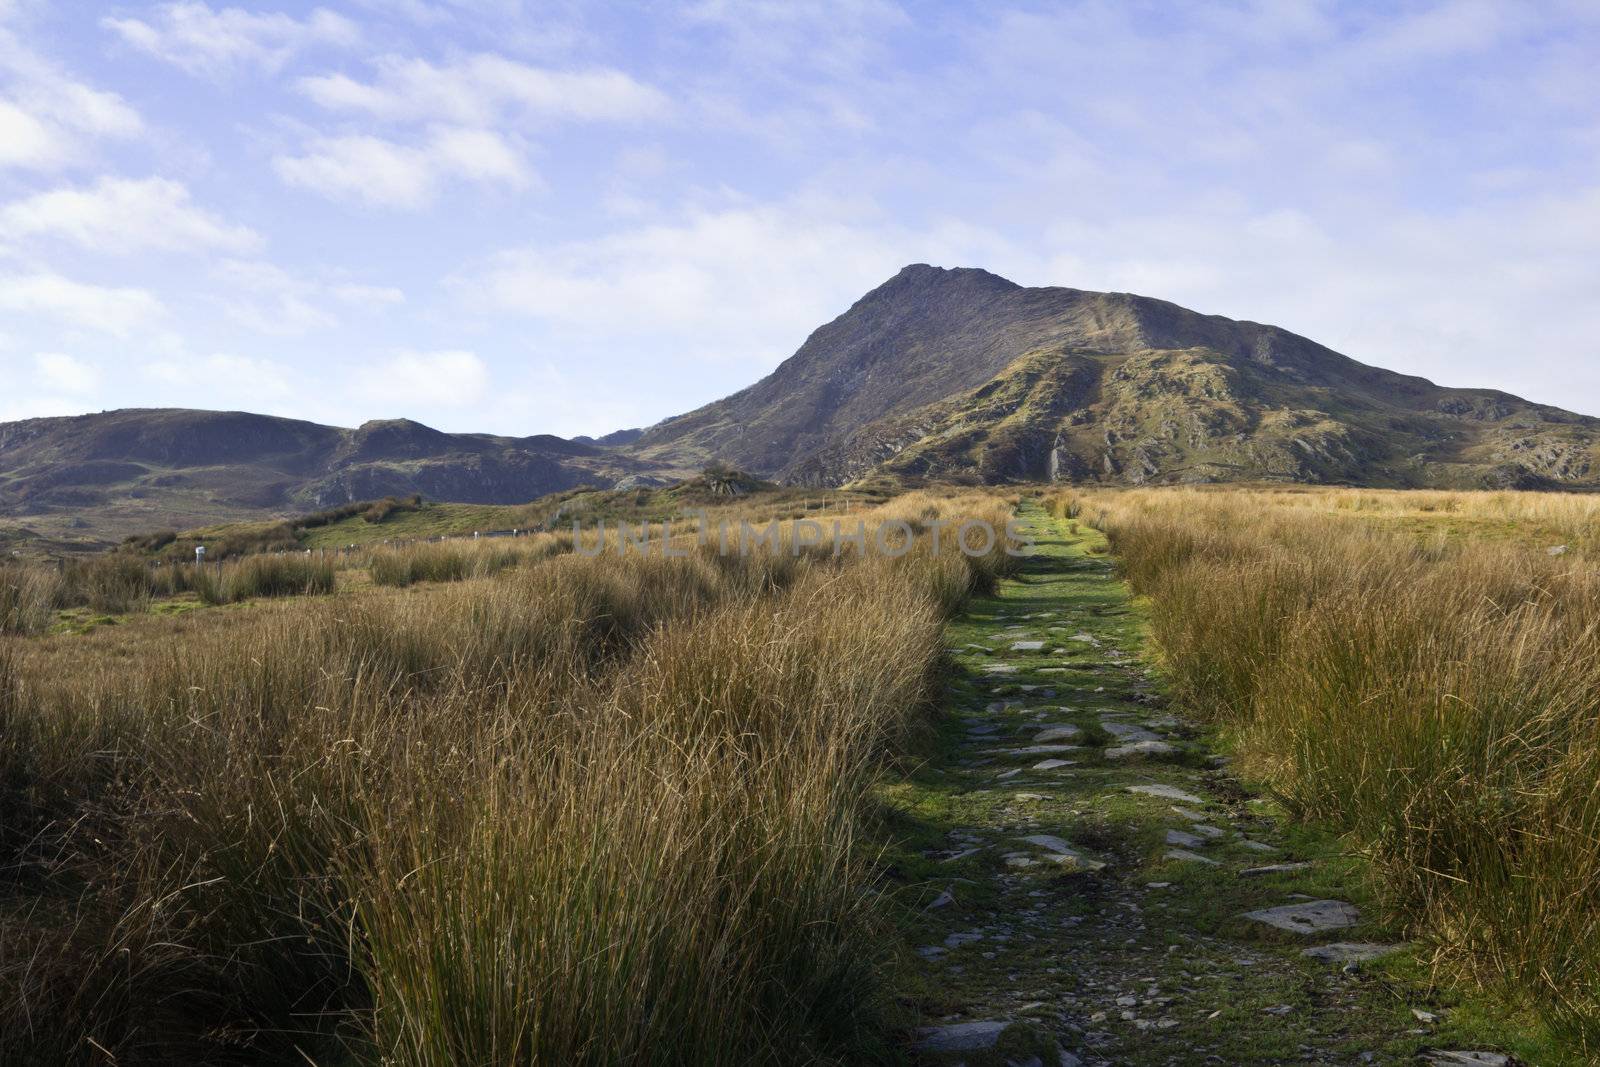 The leading to the mountain Moel Siabod in Snowdonia national park Wales